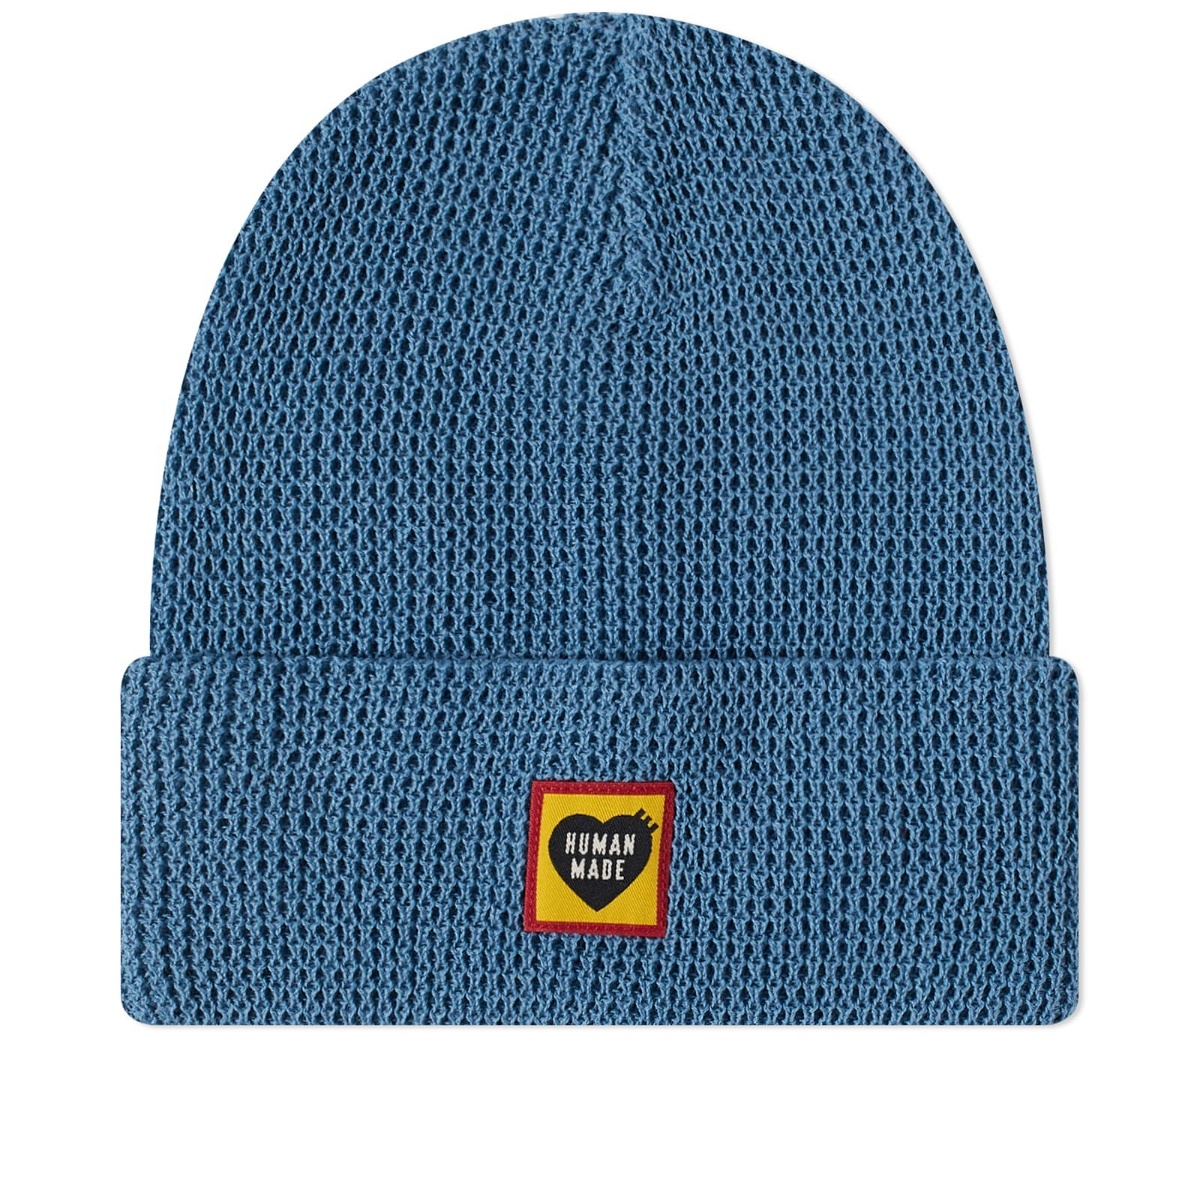 Human Made Men's Cable Pop Beanie in Navy Human Made